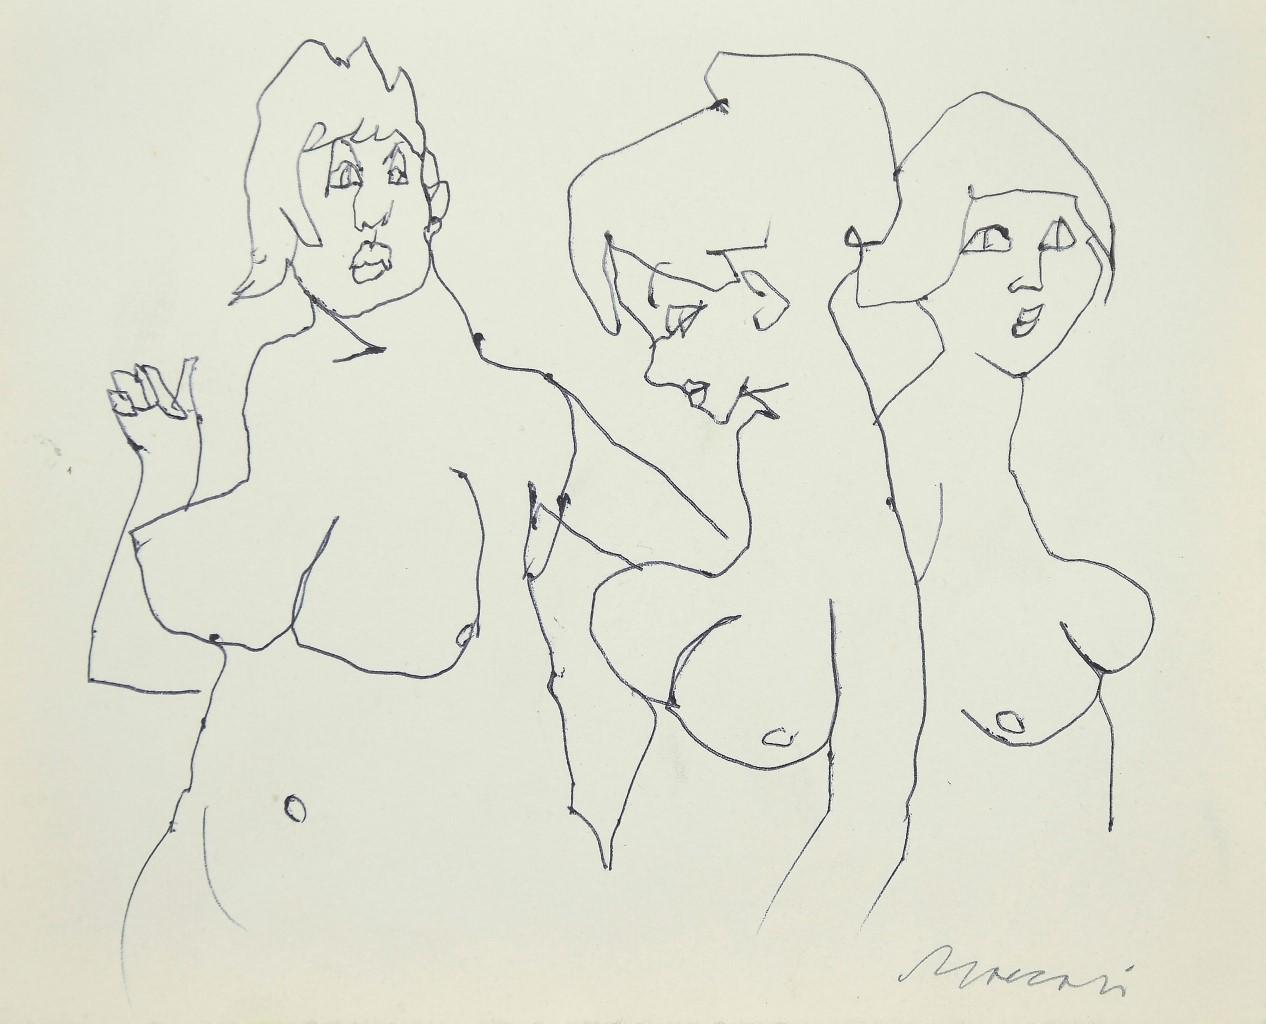 The Models is an original modern artwork realized the 1980s by the Italian artist Mino Maccari (Siena, 1898 - Rome, 1989).

Original pen drawing on Ivory paper. 

Hand-signed in pencil by the artist on the lower left corner: Maccari.

Excellent